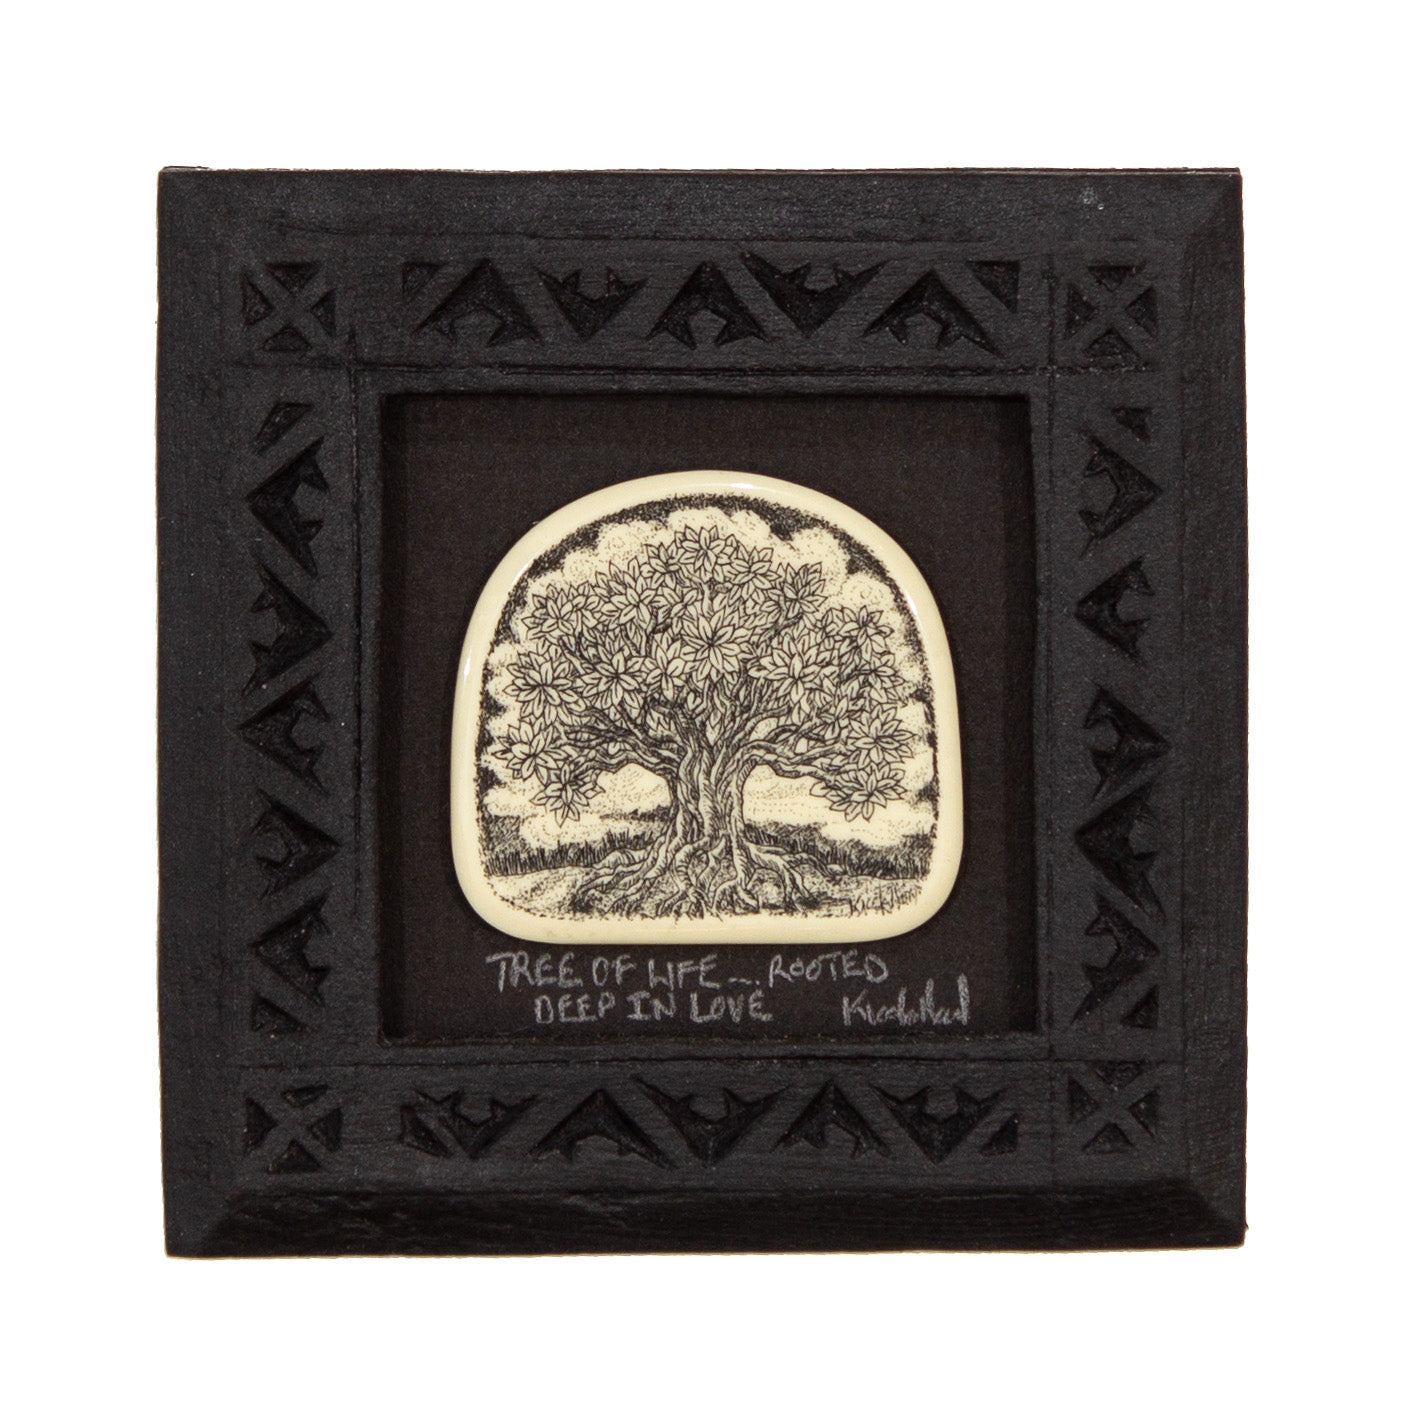 "Tree of Life… Rooted in Love" Small Chip Carved Frame